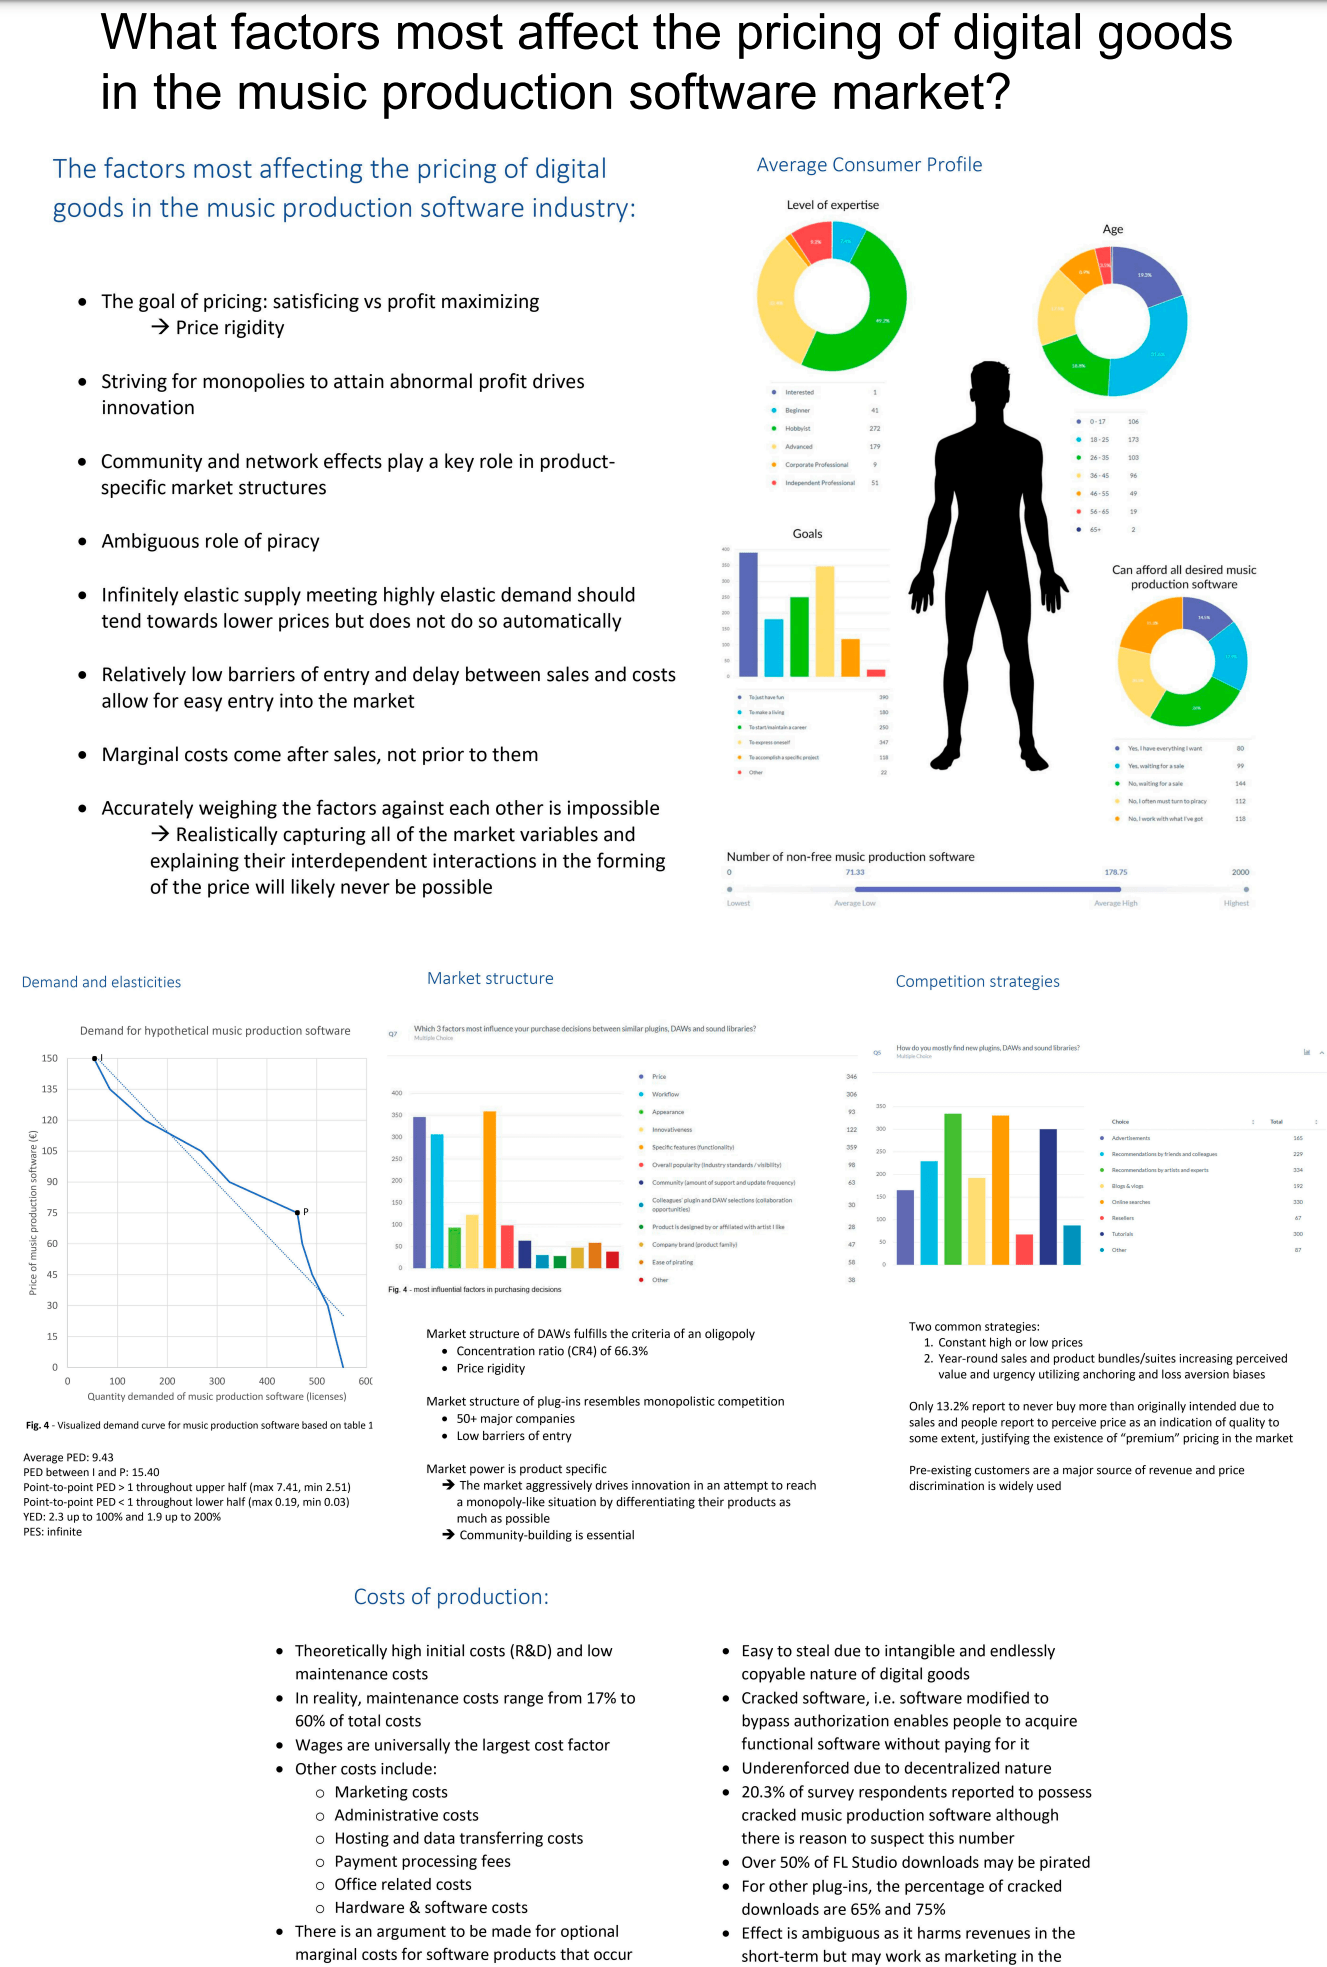 Poster 3 containing a summary of the research results